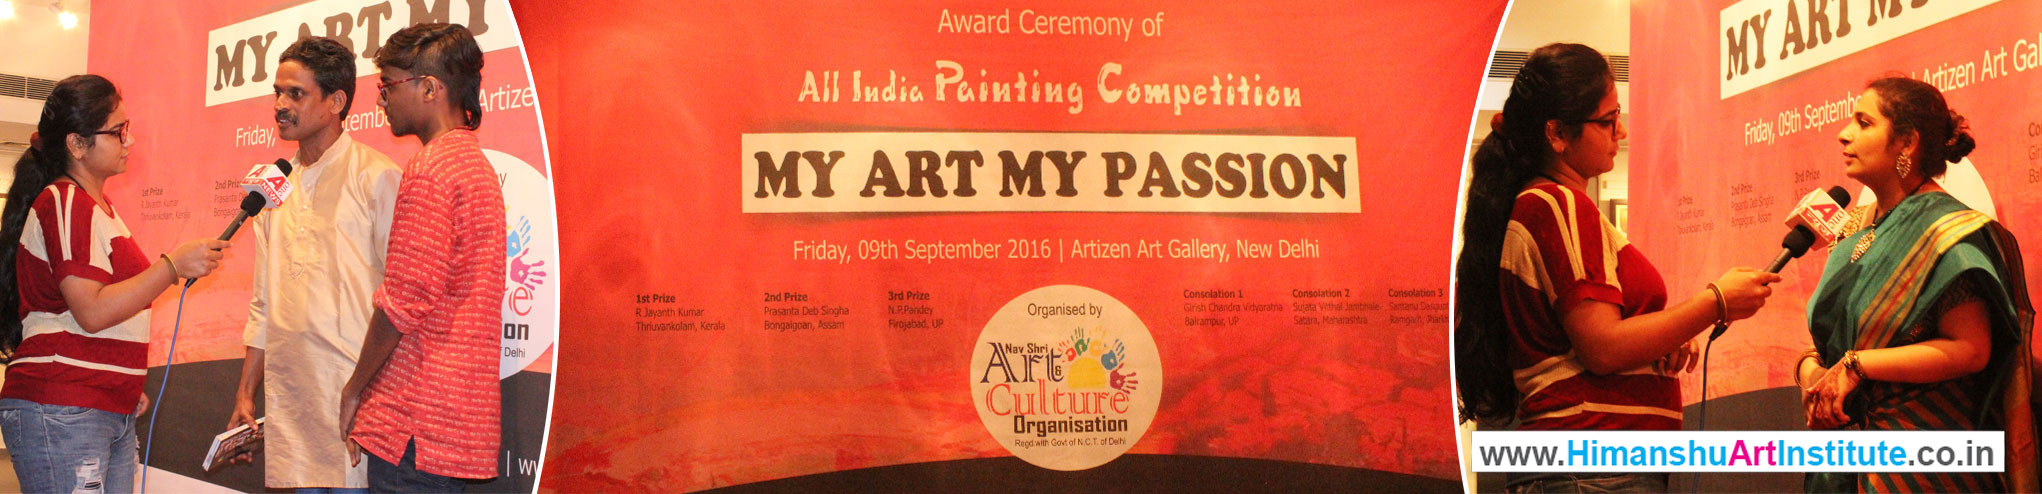 All India Painting Competition on National Level